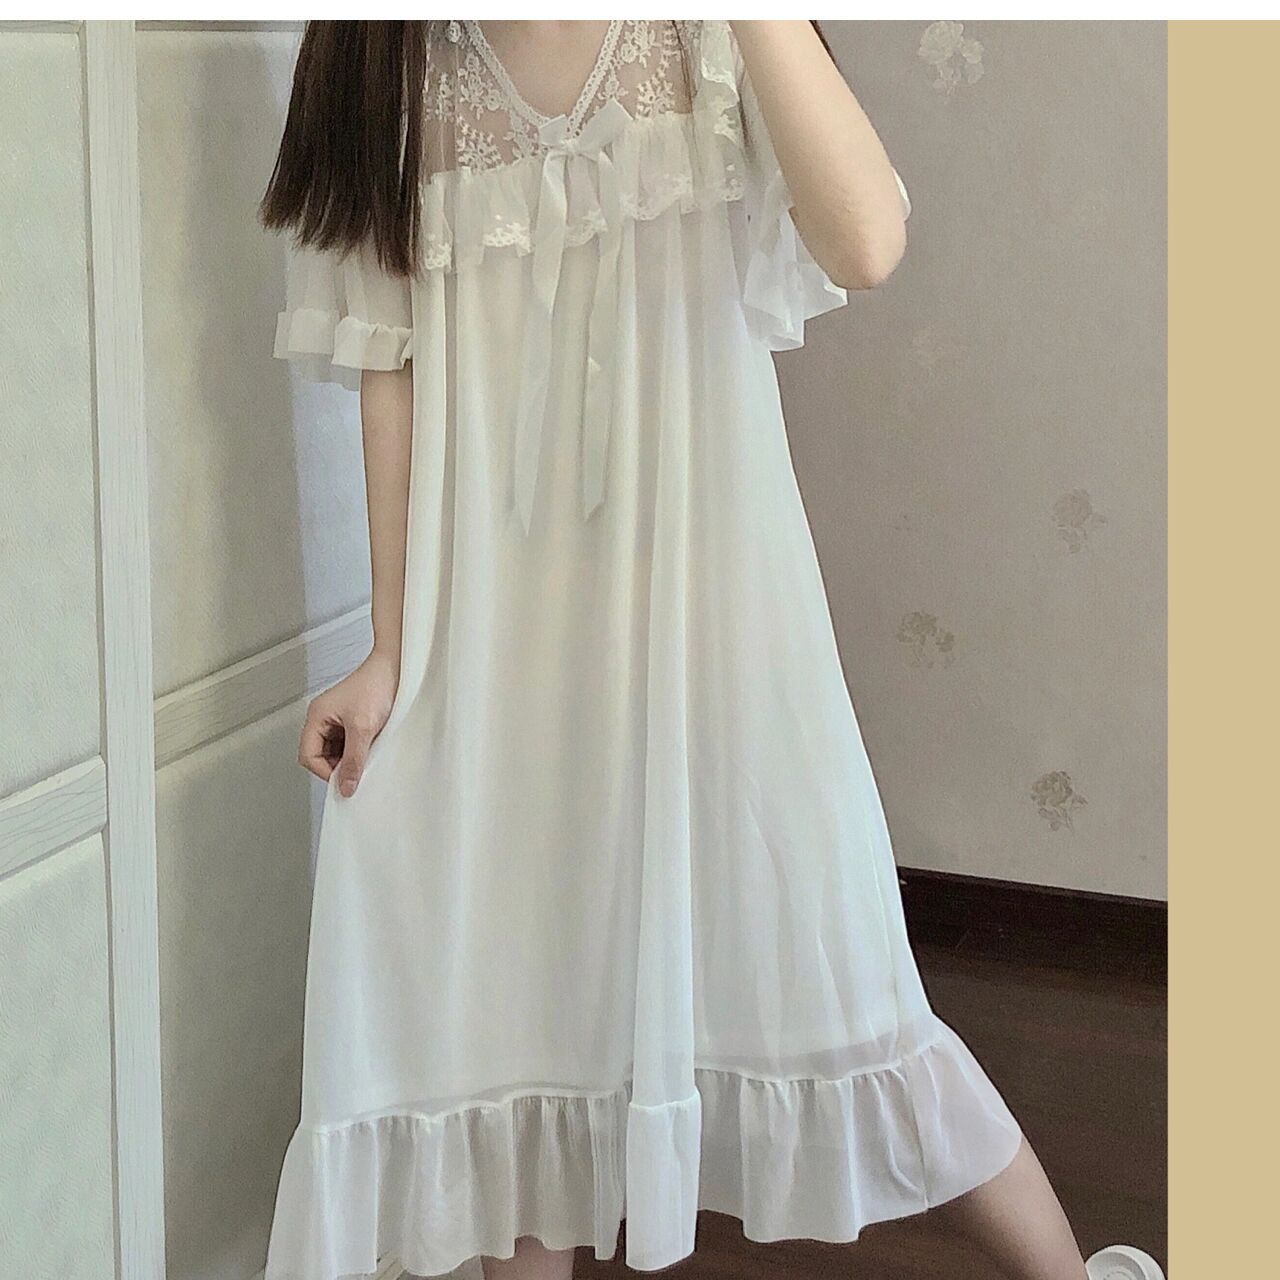 French pure desire wind mesh high-quality short-sleeved nightdress women's summer lace lace home sweet long dress